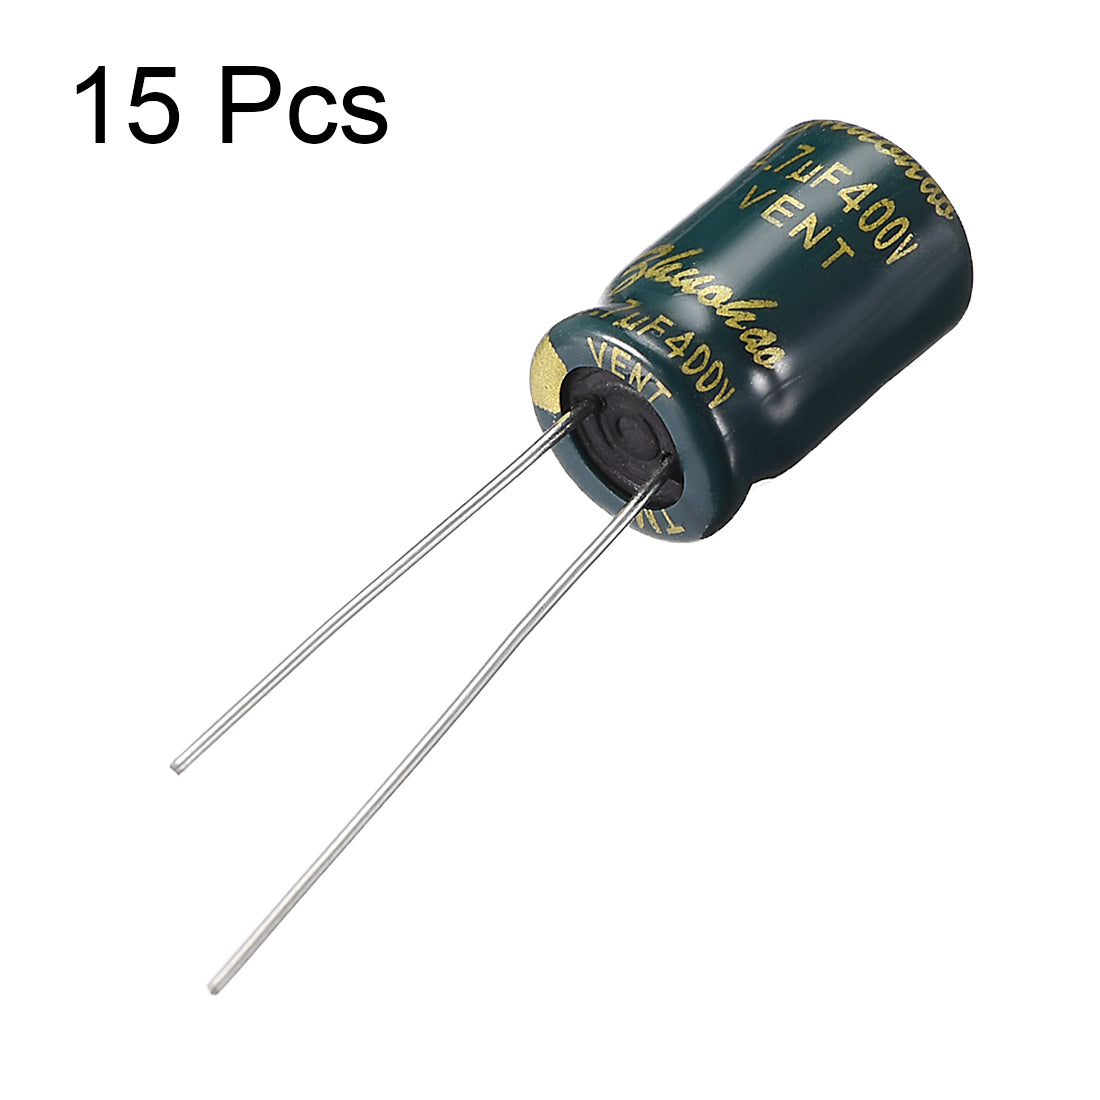 uxcell Uxcell Aluminum Radial Electrolytic Capacitor Low ESR Green with 4.7UF 400V 105 Celsius Life 3000H 8 x 12 mm High Ripple Current,Low Impedance 15pcs